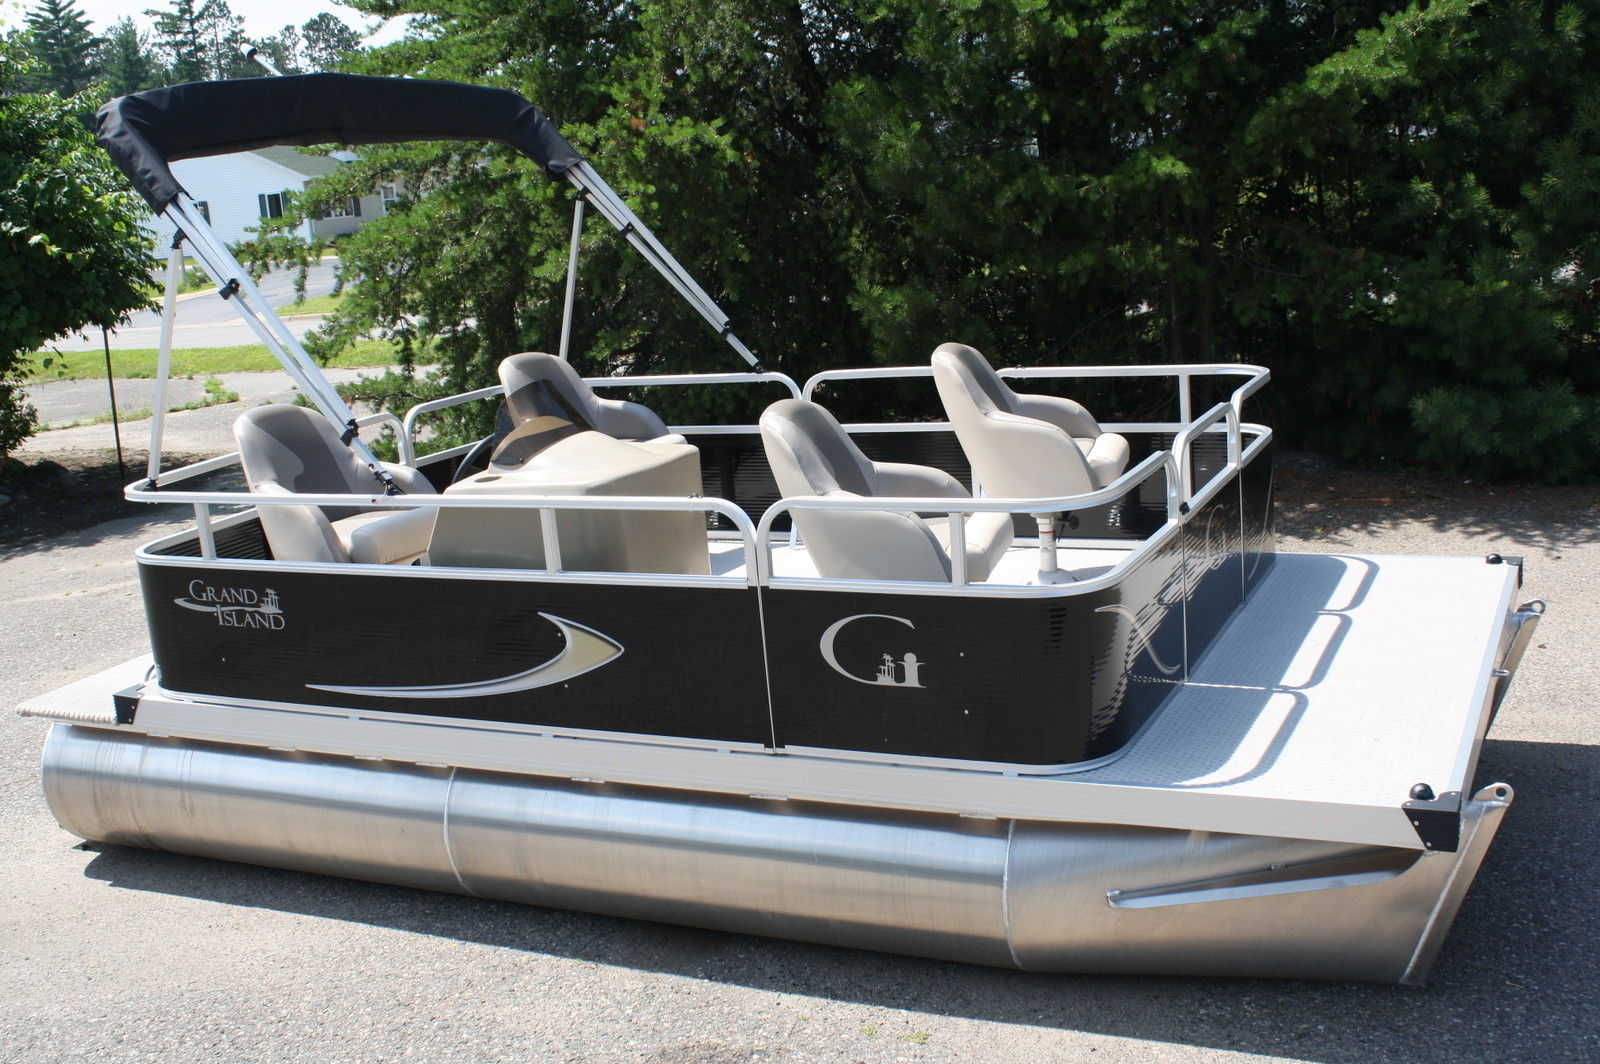 Grand Island 16 By 8 2015 for sale for $6,999 - Boats-from ...